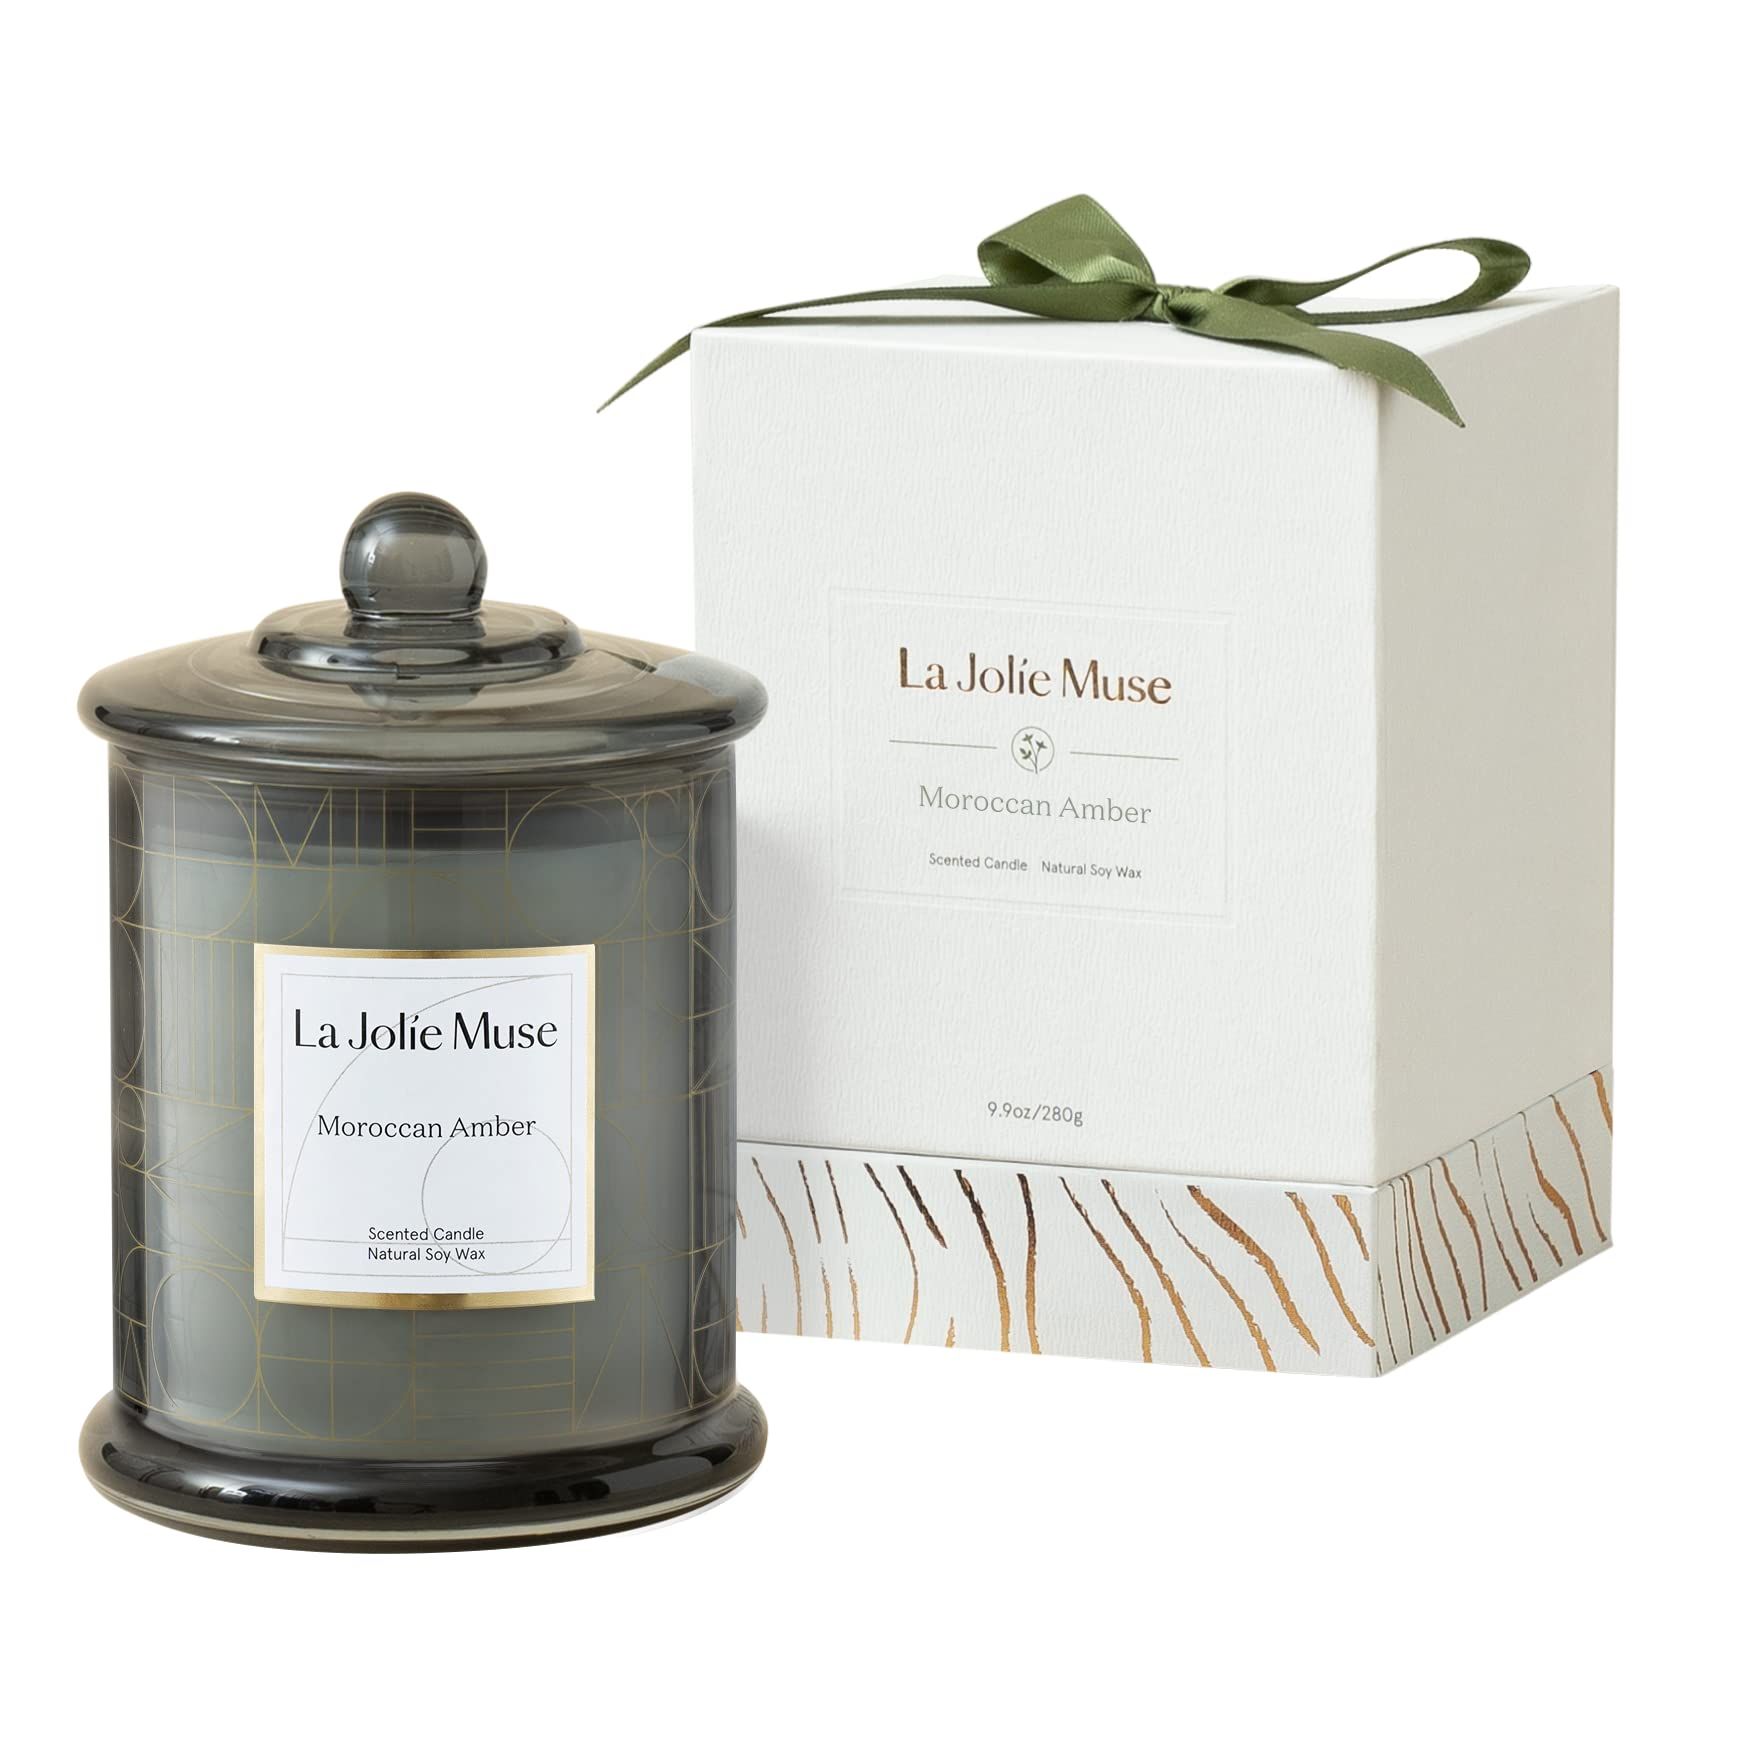 LA JOLIE MUSE Moroccan Amber Scented Candles with Gift Box, Candles Gifts for Women & Men, Natural S | Amazon (US)